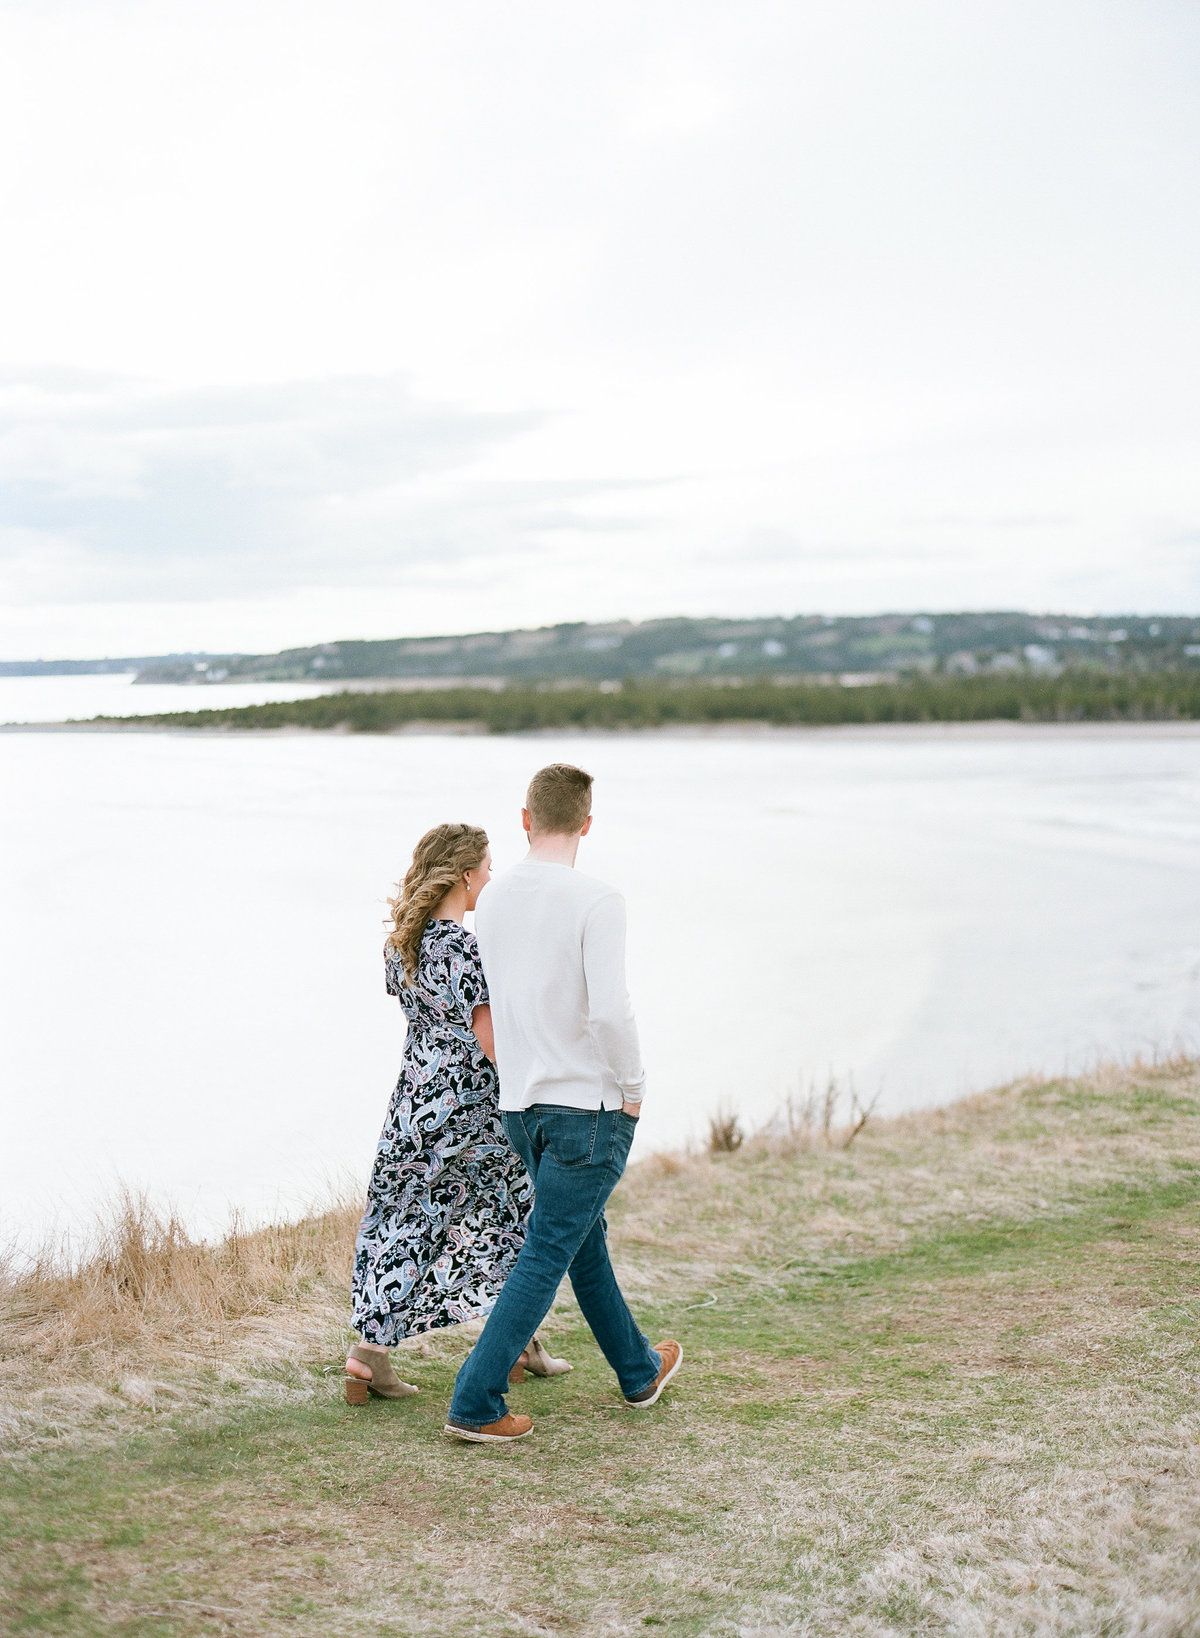 Jacqueline Anne Photography - Akayla and Andrew - Lawrencetown Beach-70